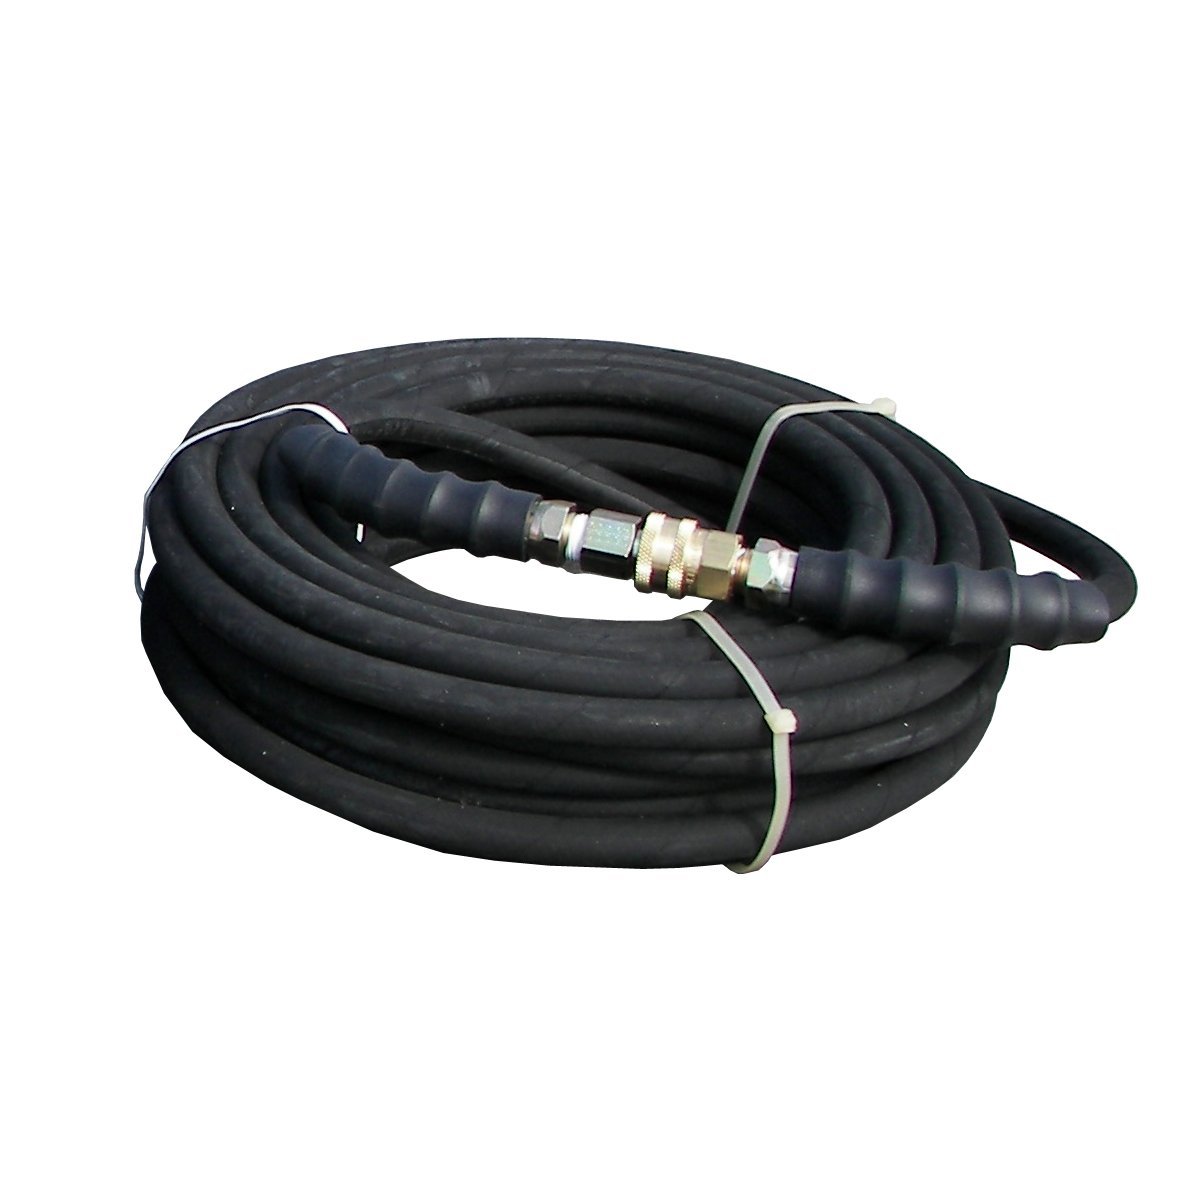 BE Pressure 85.238.153 Pressure Washer 1 Wire Hose 50 ft X 3/8 ID 4200 psi with QC Assembly GTIN 777897100563